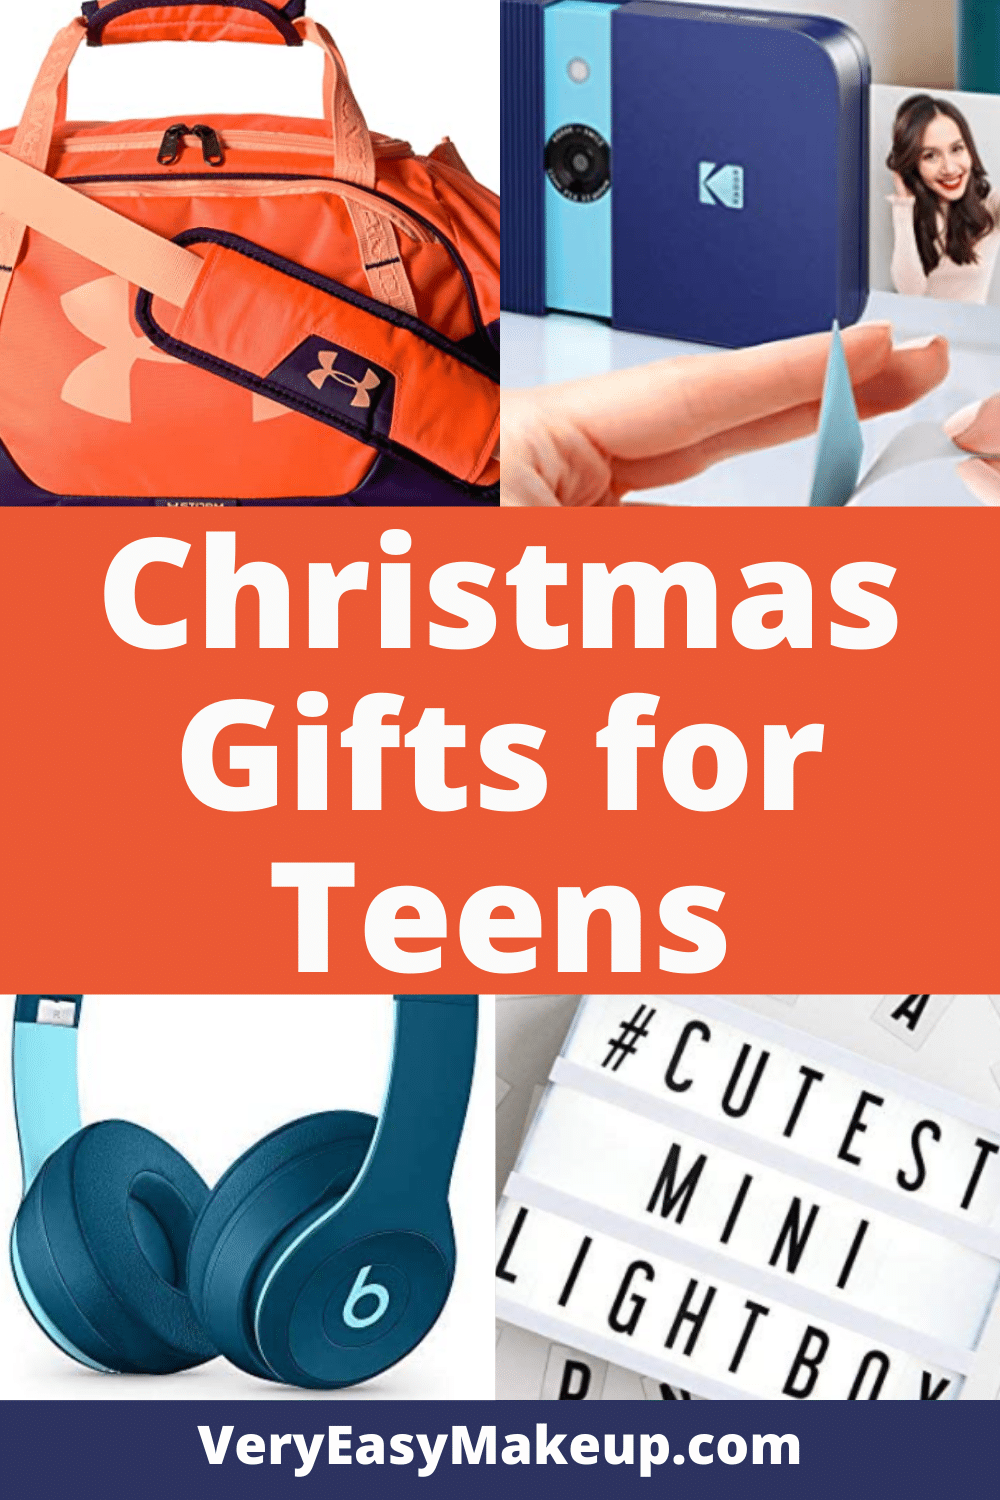 Christmas Gifts for Teens by Very Easy Makeup